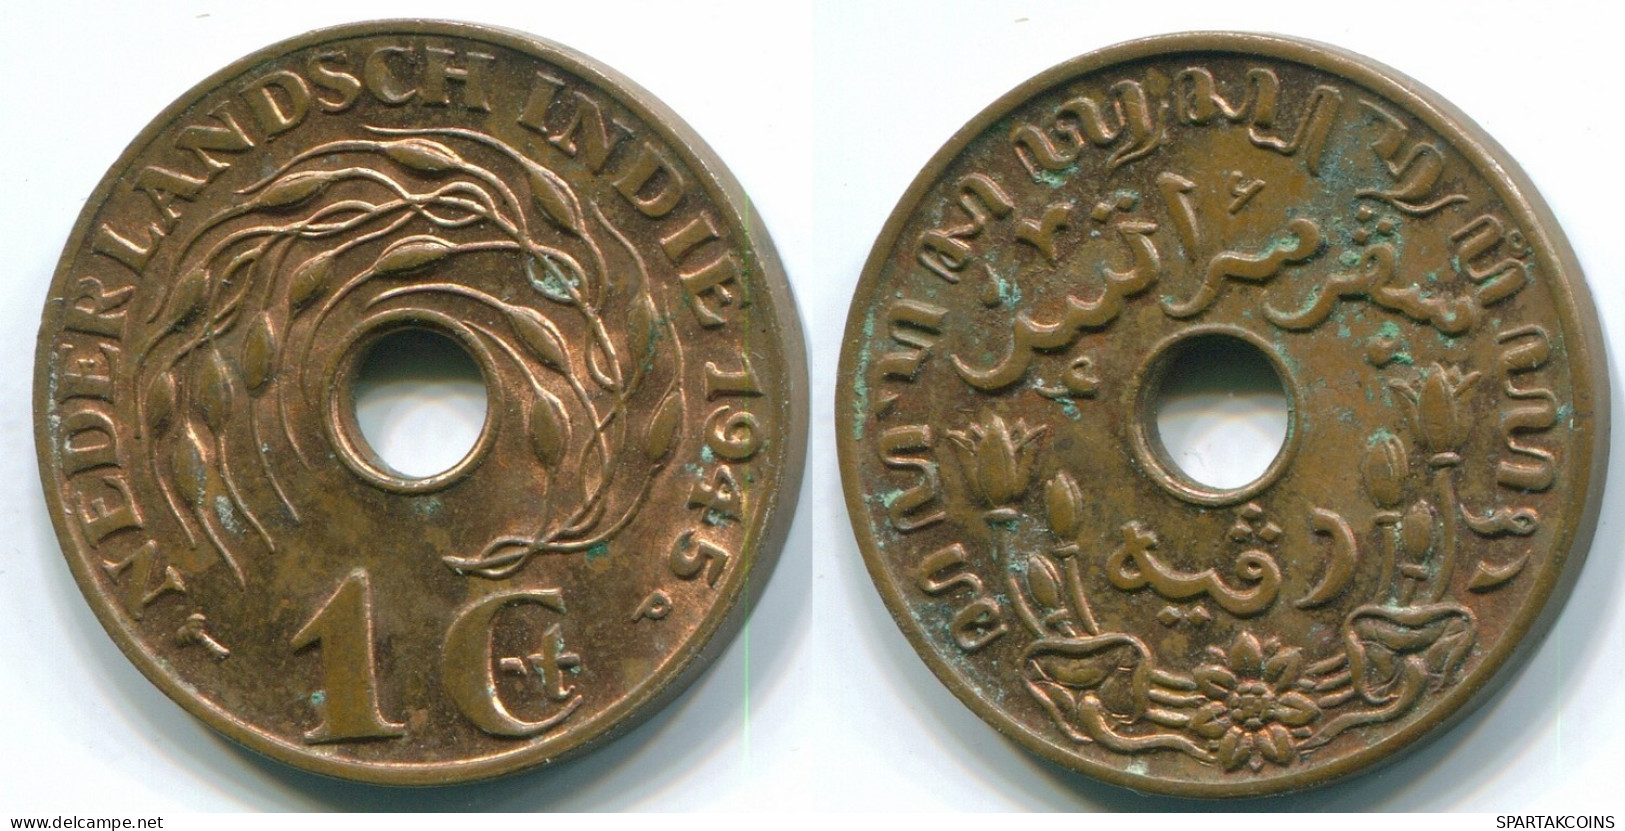 1 CENT 1945 P NETHERLANDS EAST INDIES INDONESIA Bronze Colonial Coin #S10355.U.A - Dutch East Indies